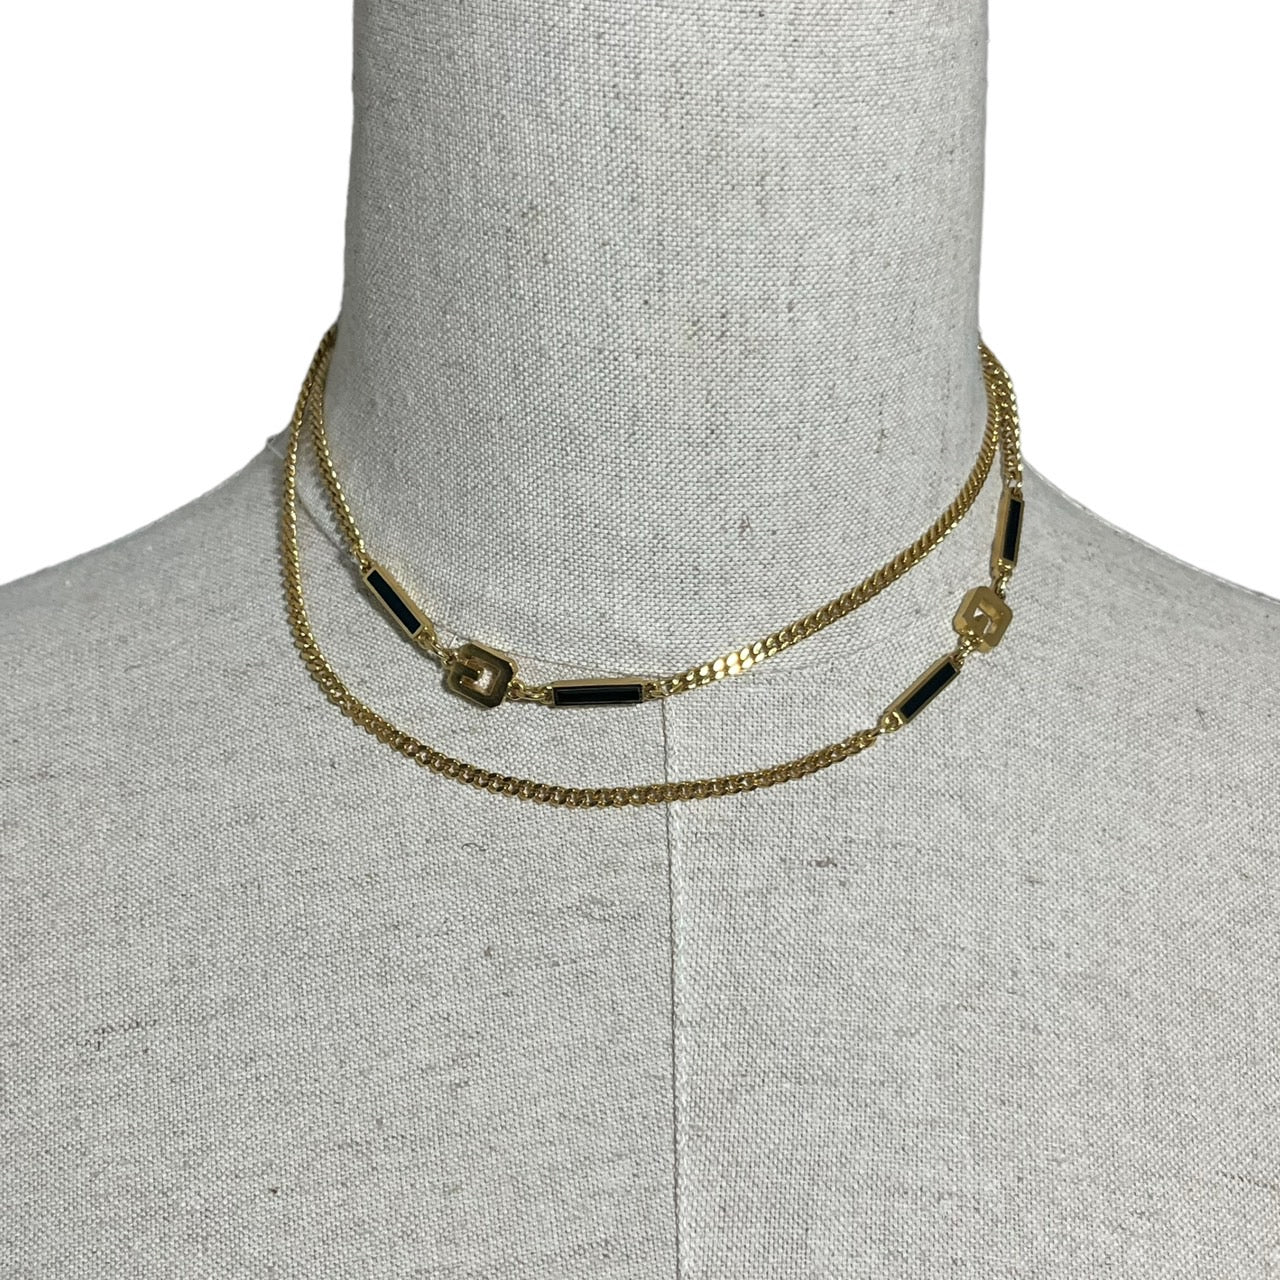 GIVENCHY(ジバンシィ) 80's G logo chain necklace ロゴ チェーン ネックレス1980刻印 ジバンシー